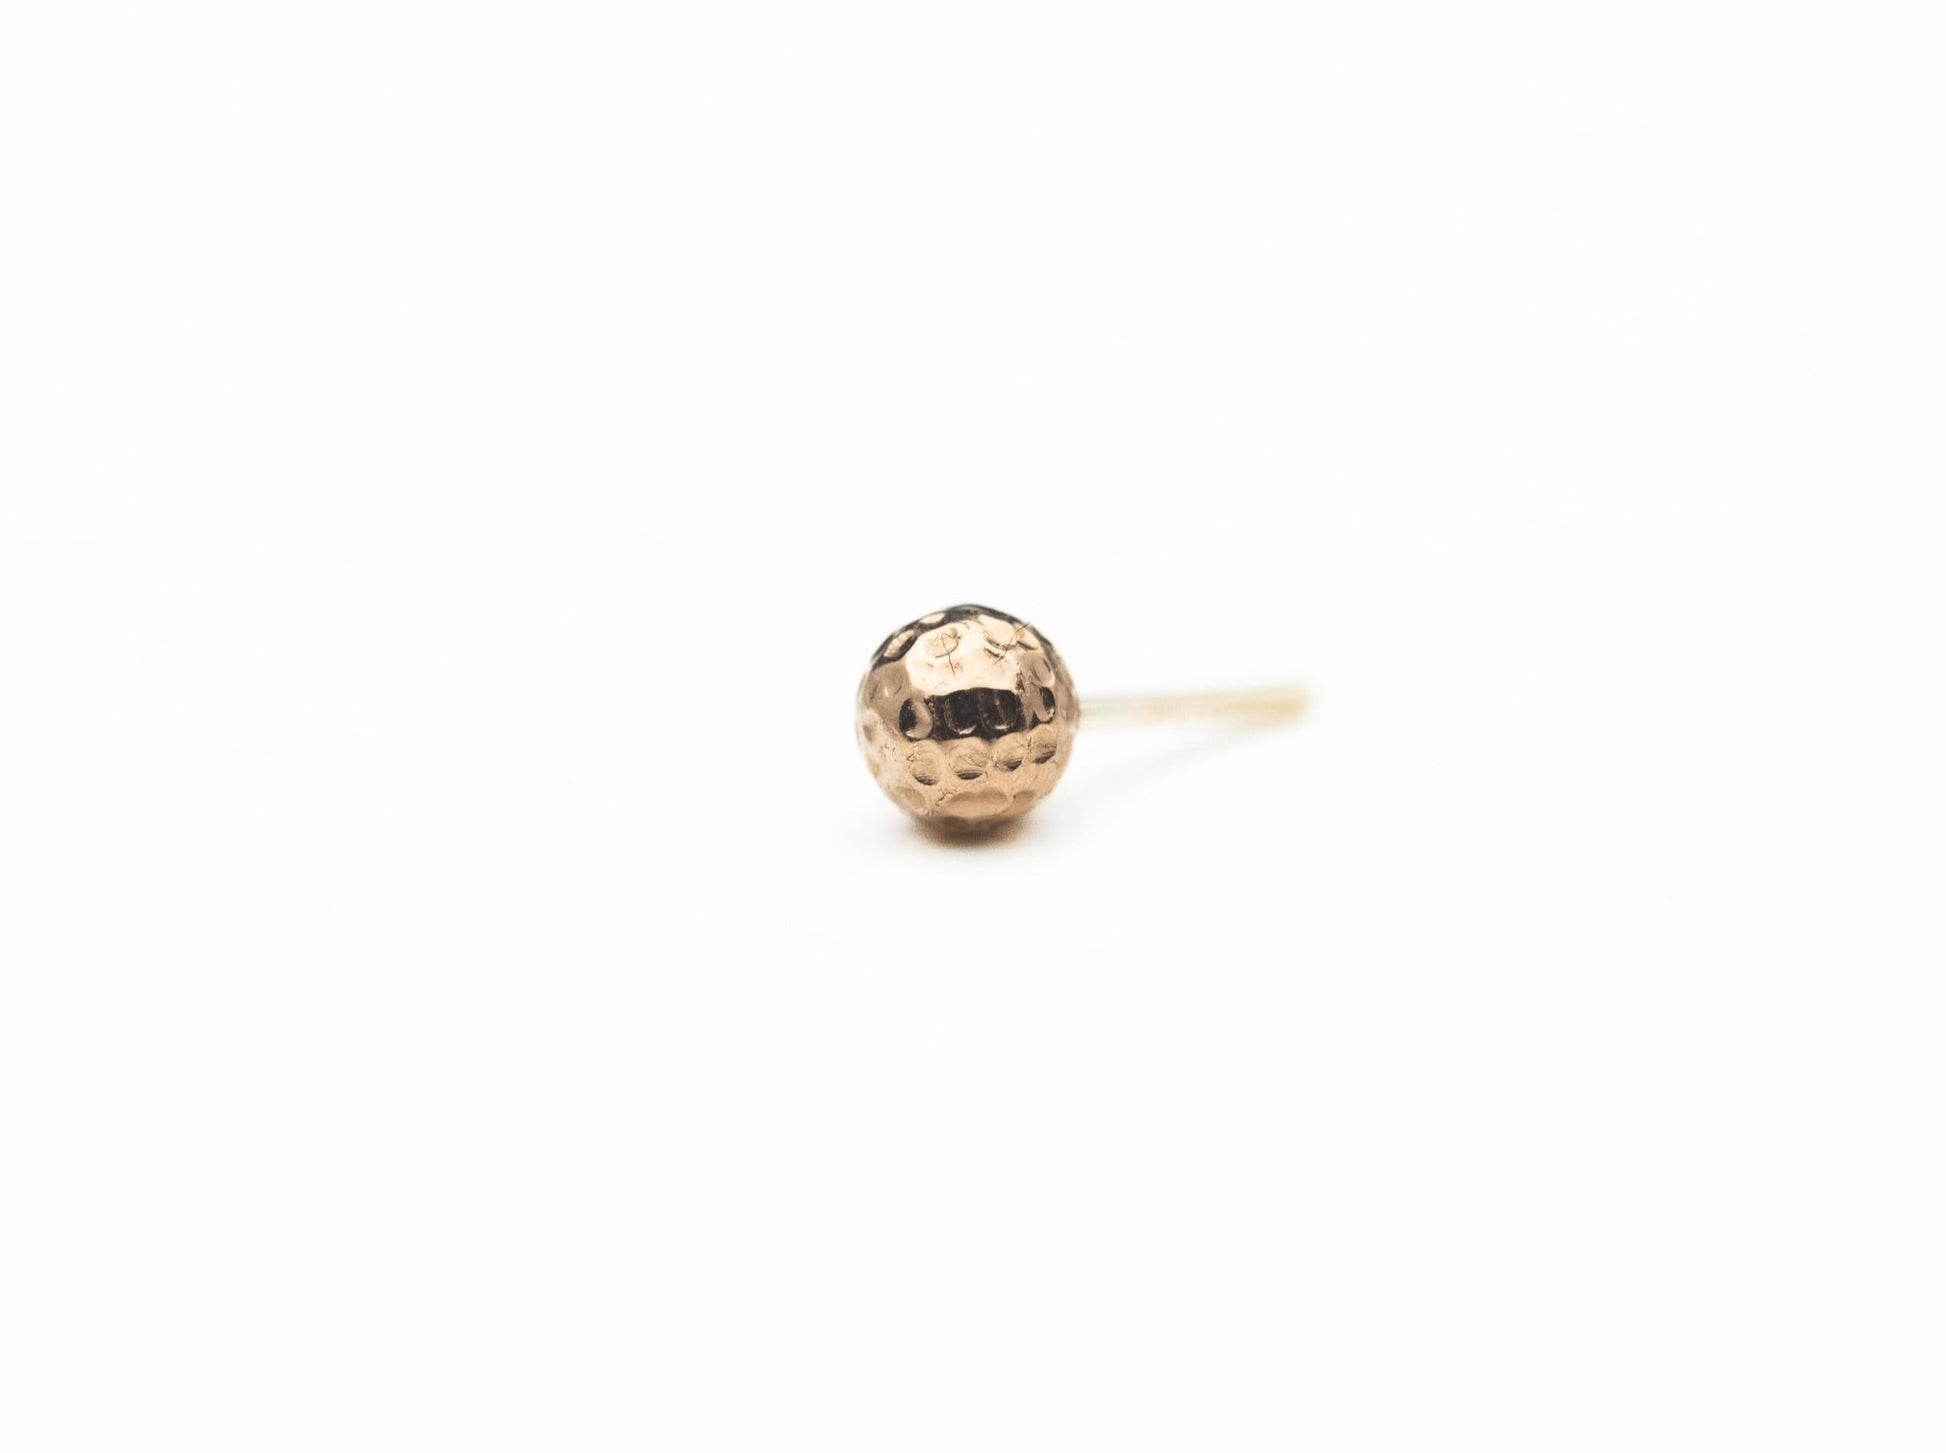 2.5mm Hammered Bead in 14k Rose Gold Threadless by BVLA